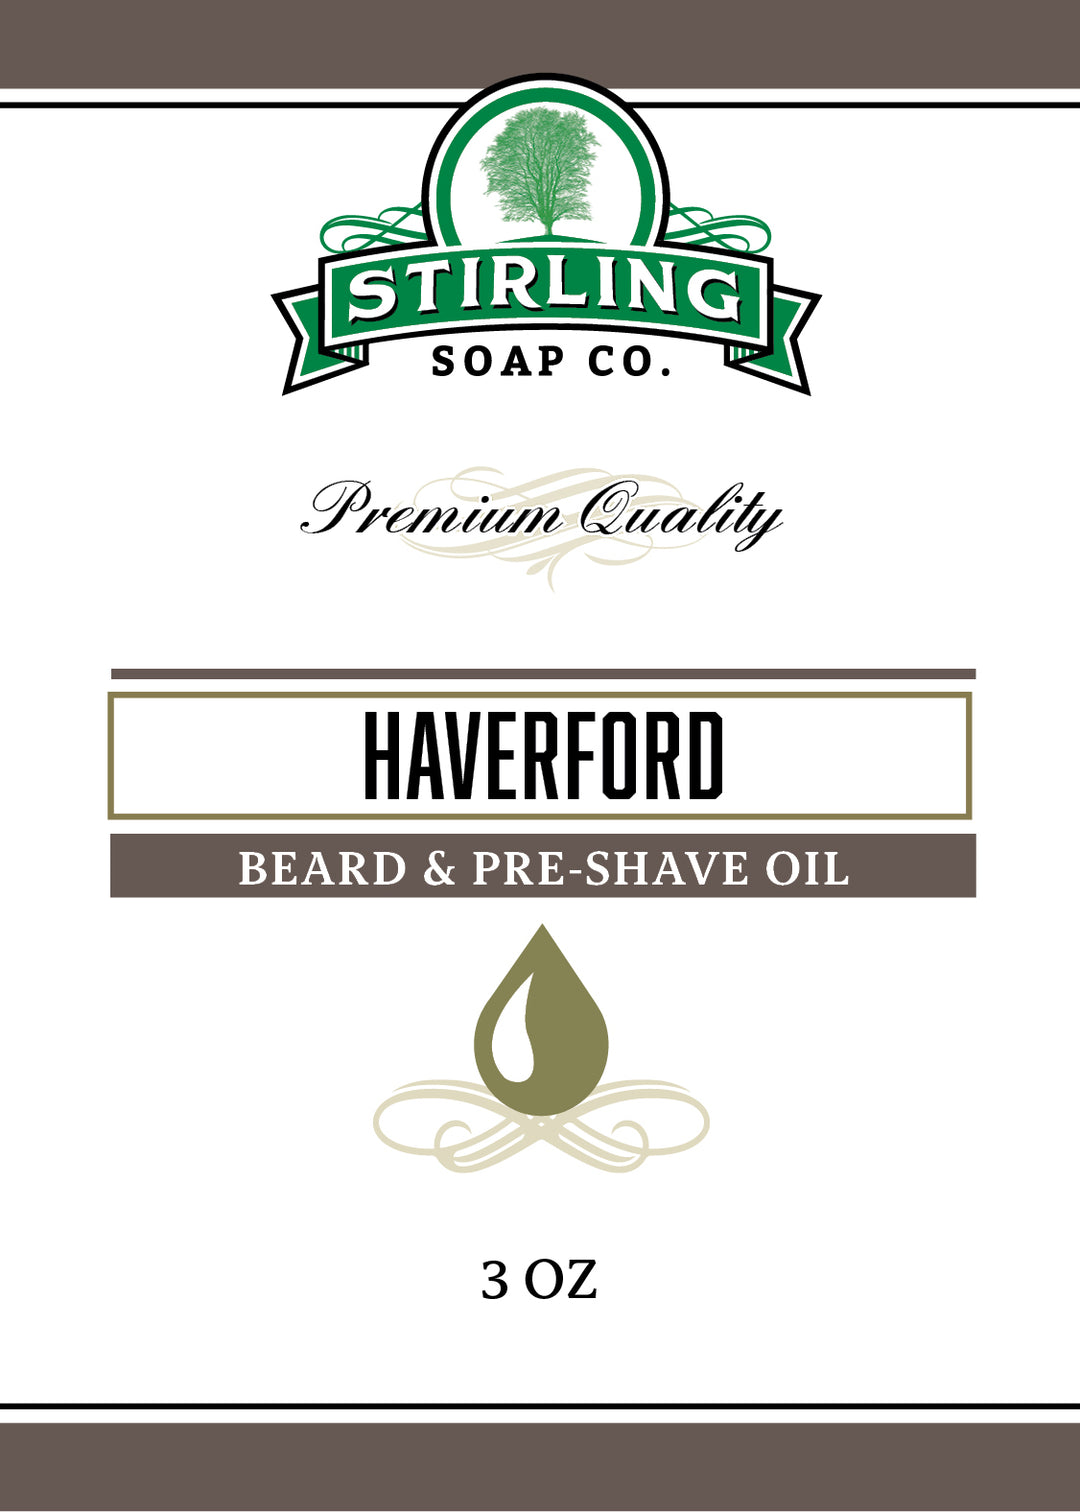 Haverford - Beard & Pre-Shave Oil